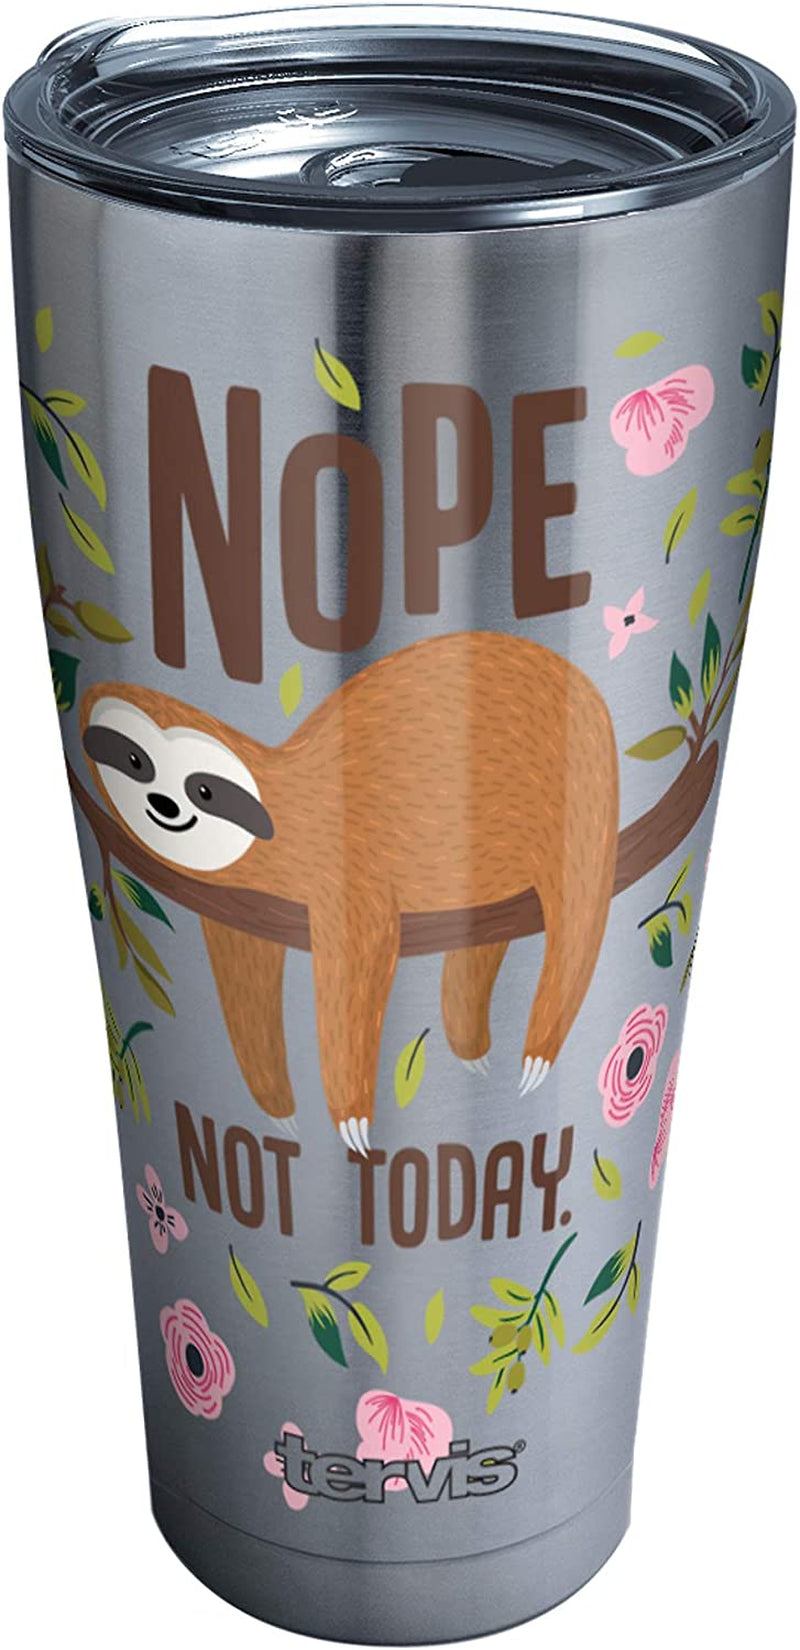 Tervis 1303151 Sloth Nope Not Today Insulated Tumbler with Wrap and Pink Lid, 16 Oz, Clear Home & Garden > Kitchen & Dining > Tableware > Drinkware Tervis Tumbler Company Stainless Steel 30oz 